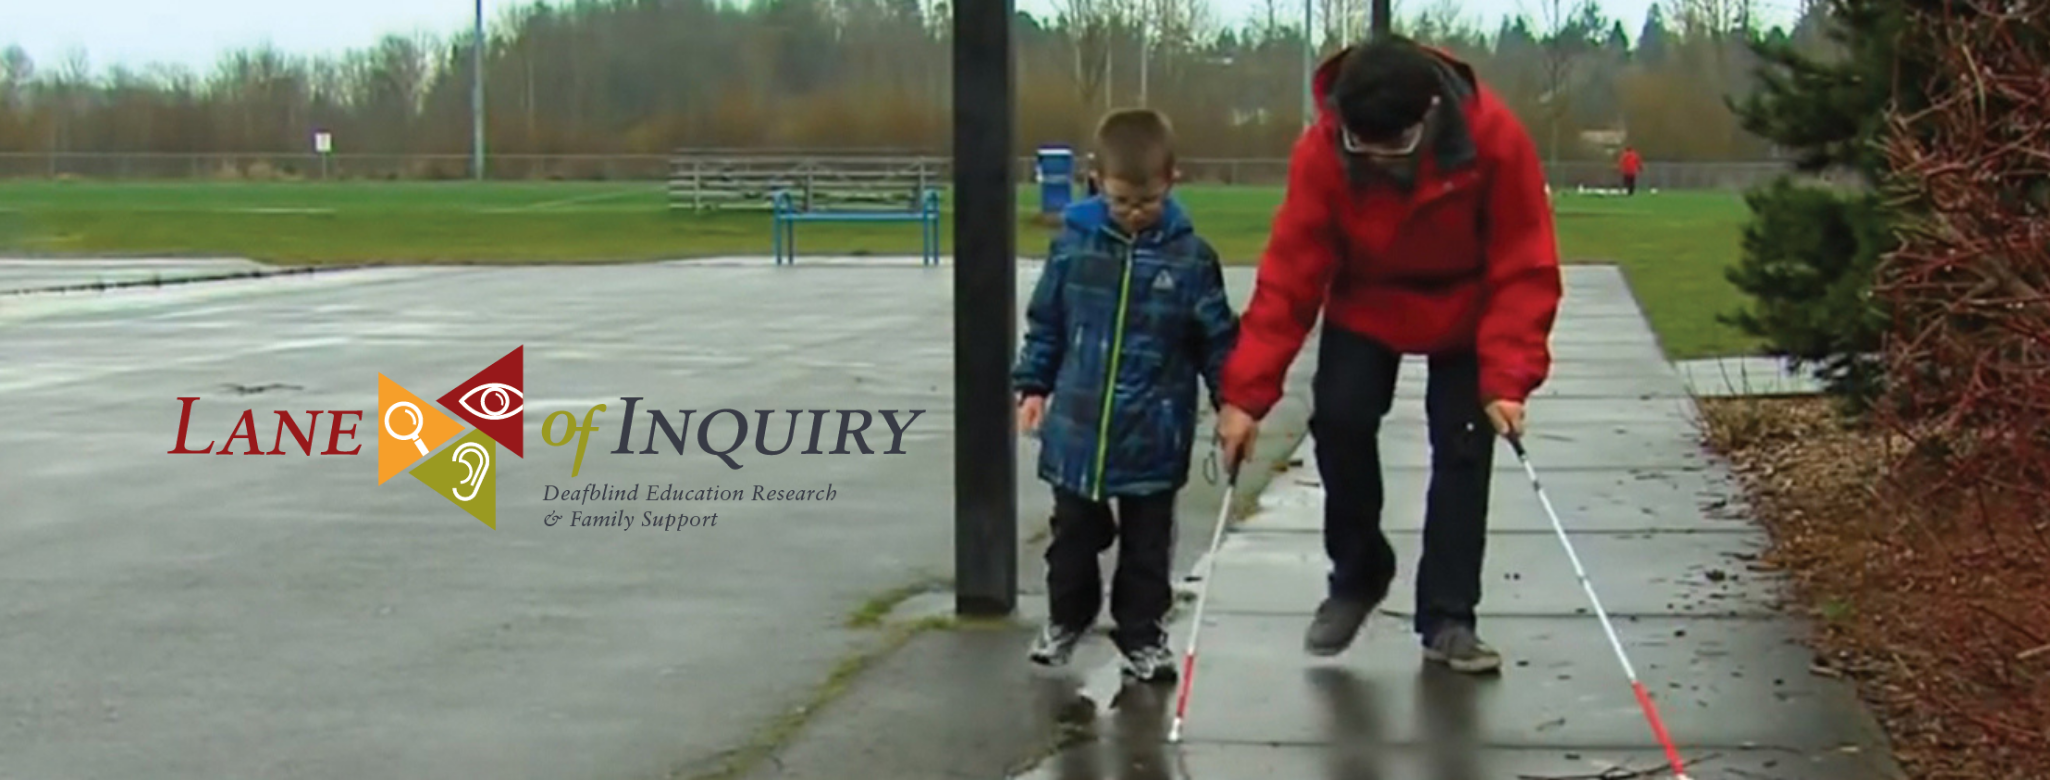 Older boy on right in red rain coat helping younger boy on left in blue rain coat learn how to use a white cane.